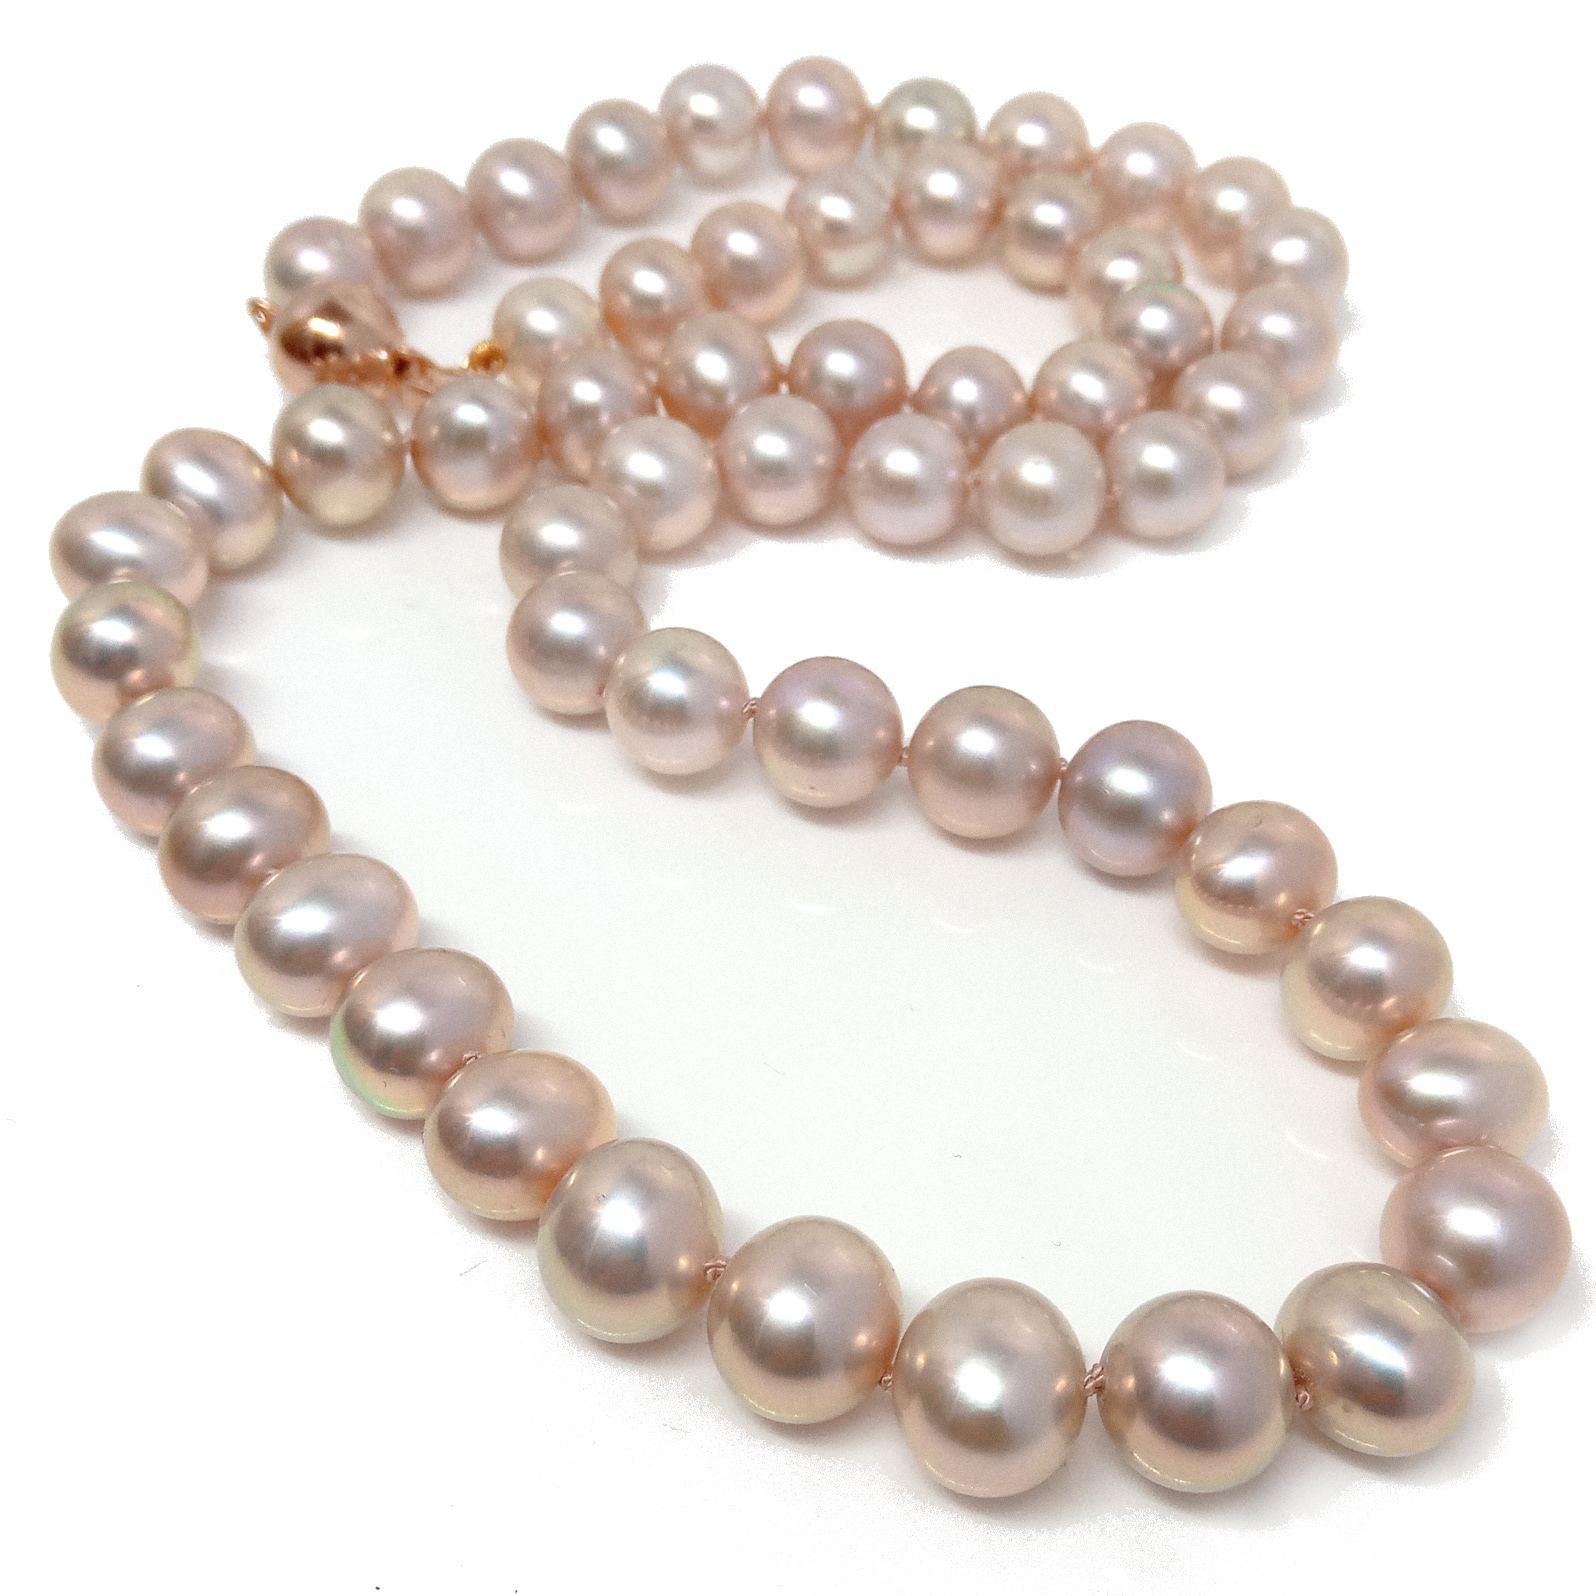 Sandy Gold 8.7-10mm Pearl Necklace